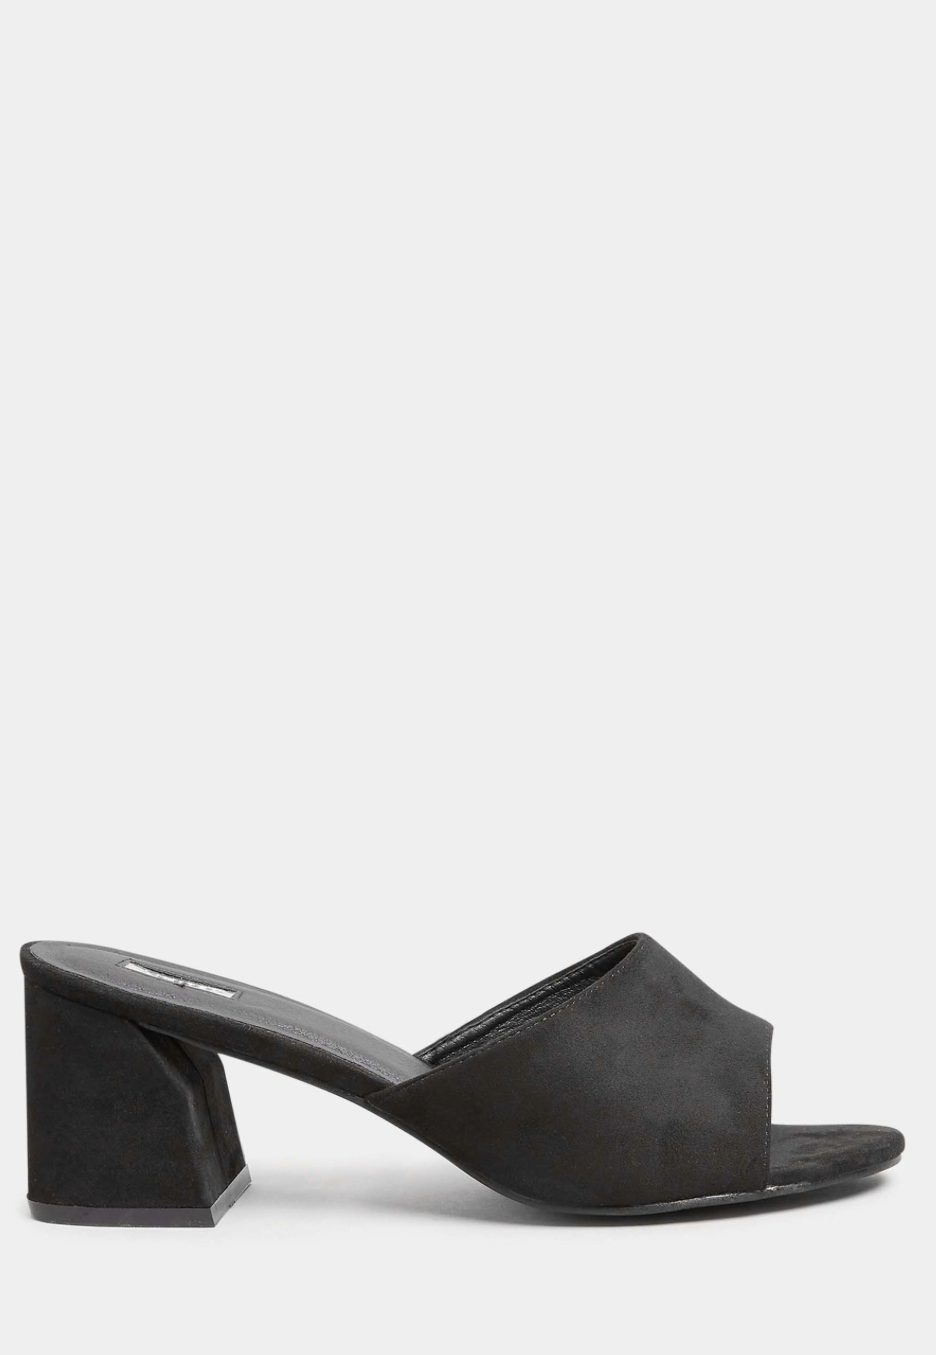 LIMITED COLLECTION Black Cut Out Block Heel Sandals £15